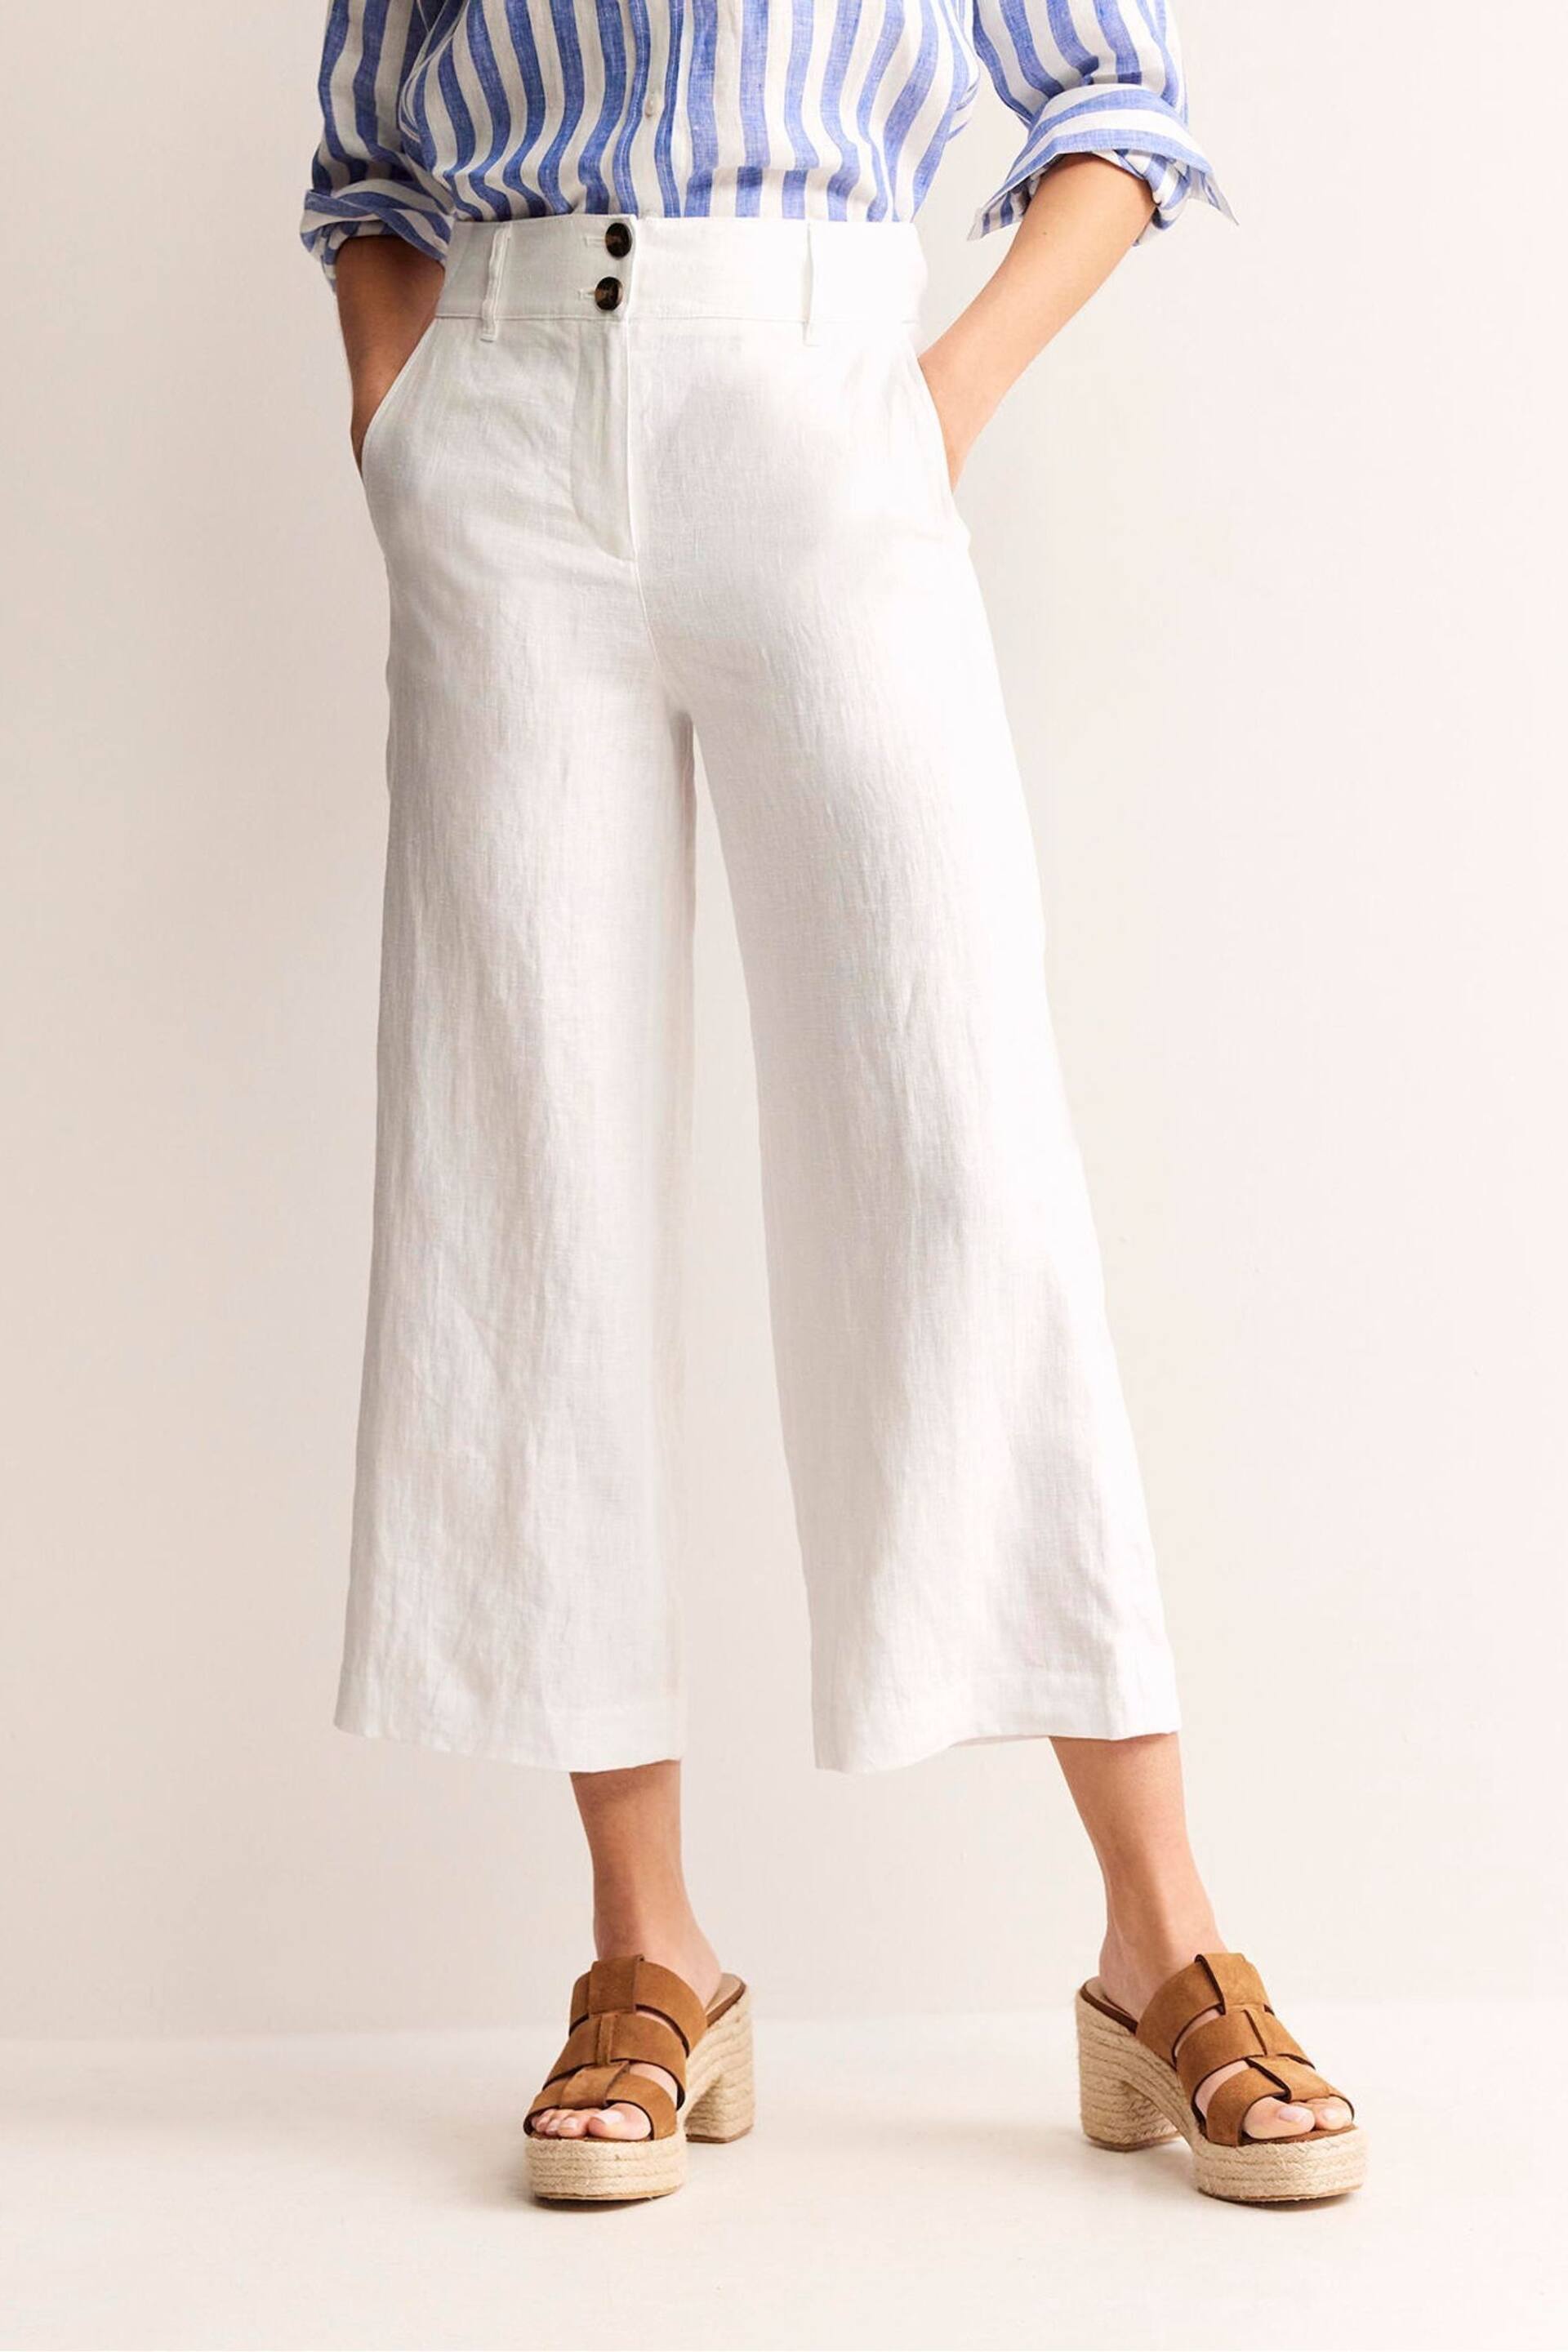 Boden White Westbourne Linen Crop Trousers - Image 4 of 5